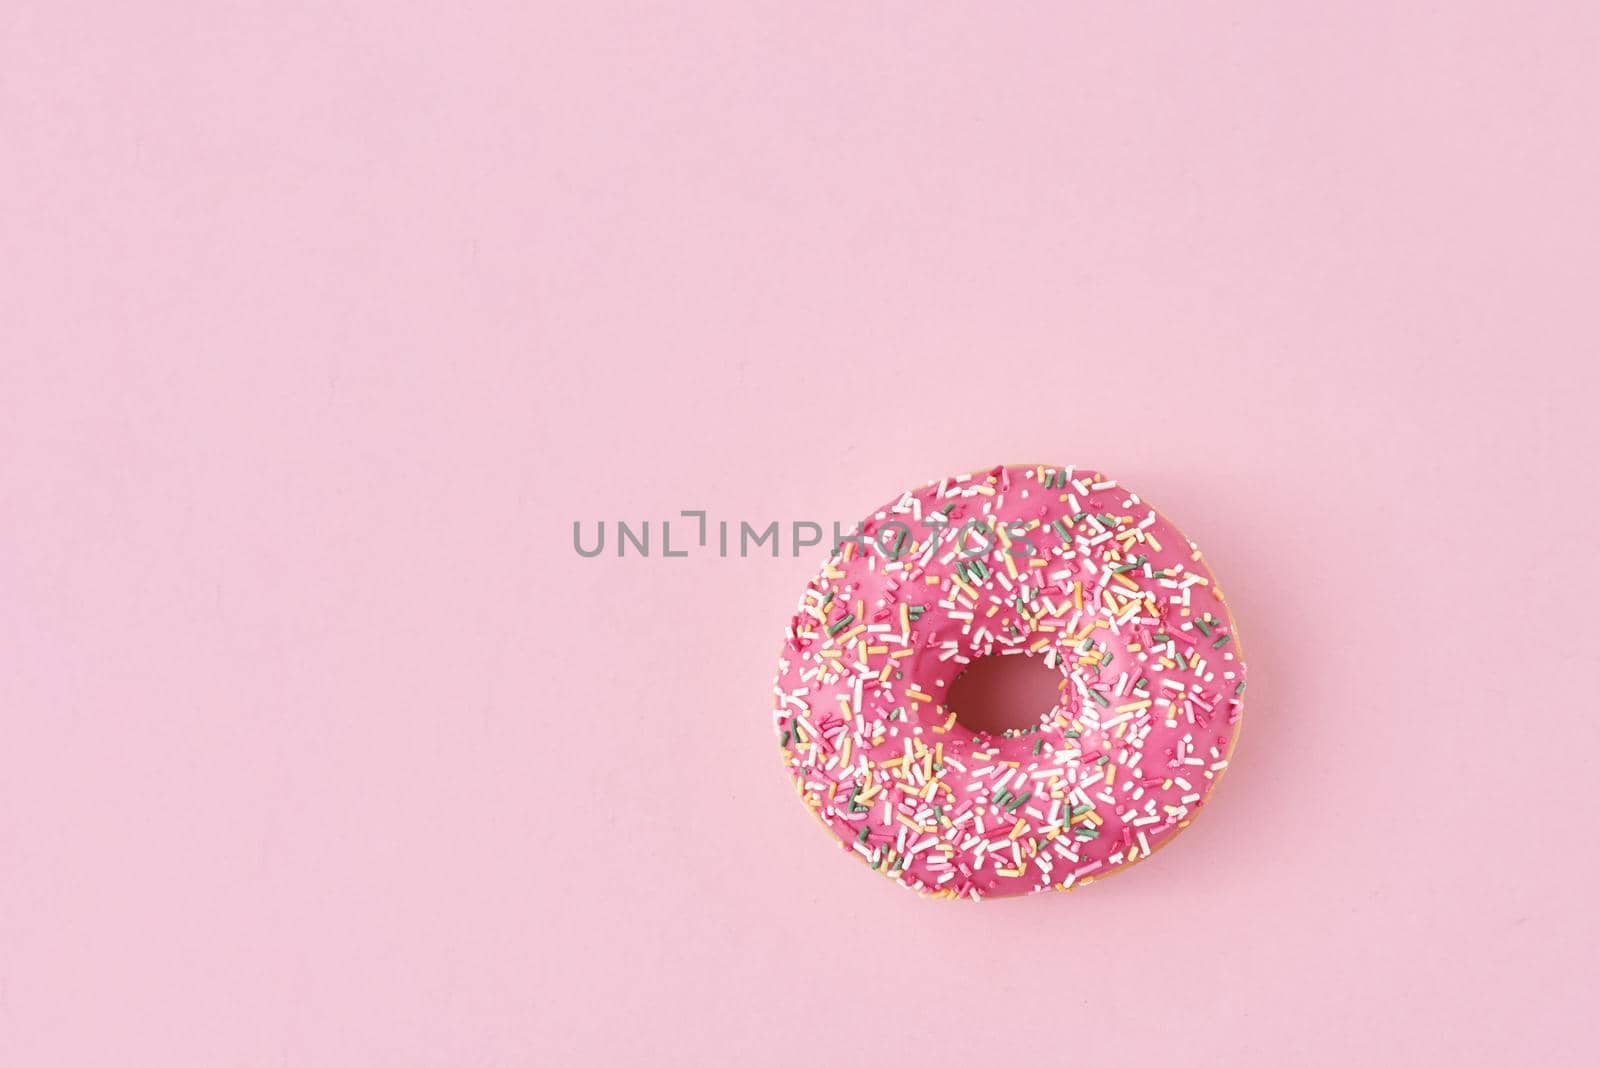 donats decorated sprinkles and icing on pink background. Creative and minimalis food concept, top view flat lay